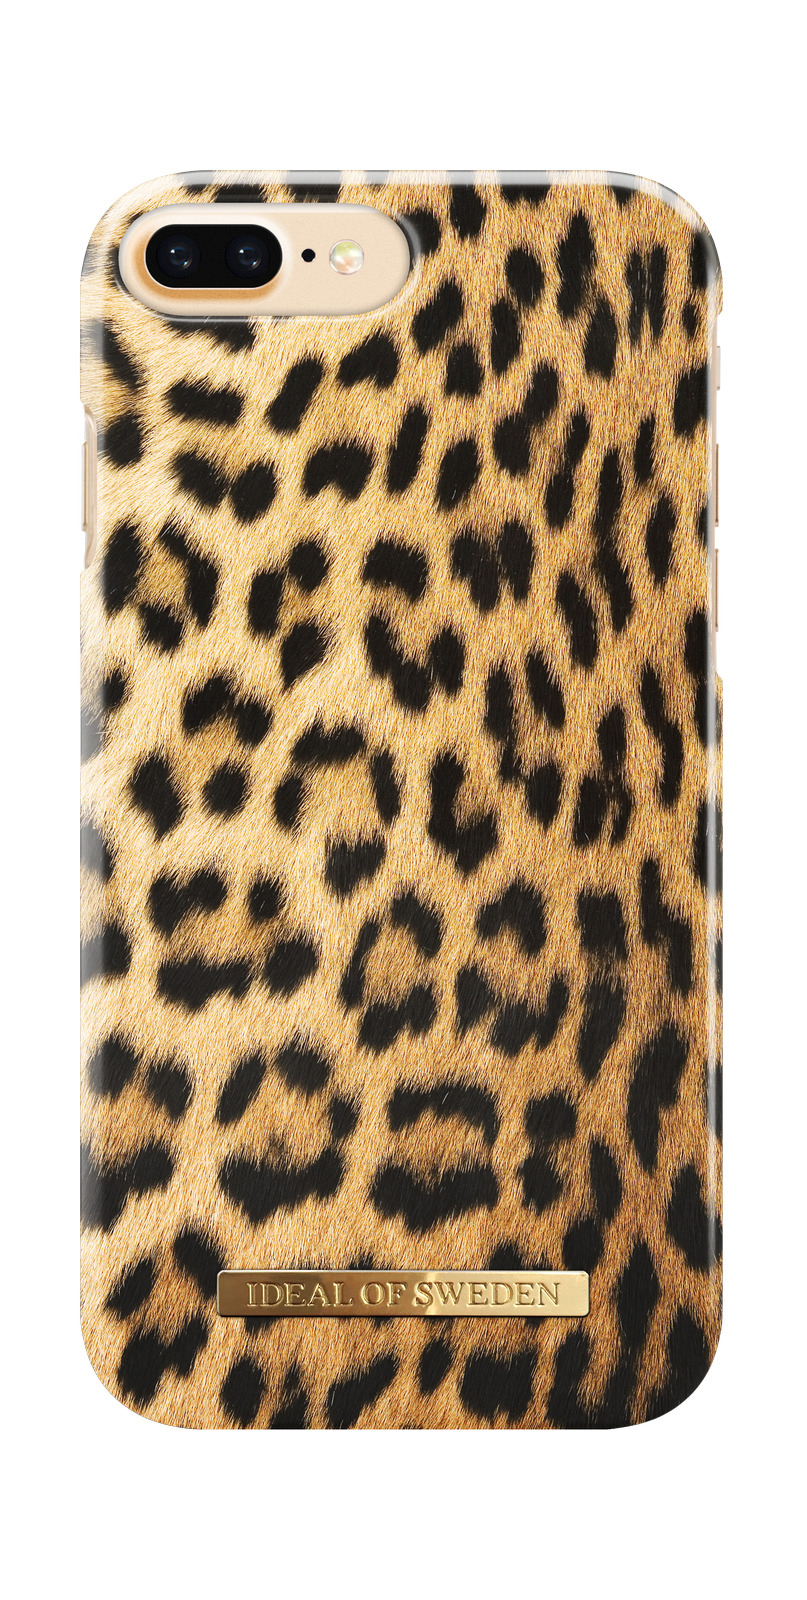 IDEAL OF SWEDEN Fashion, Backcover, Leopard Plus, Plus, 8 iPhone iPhone Wild ,iPhone 7 6 Plus Apple